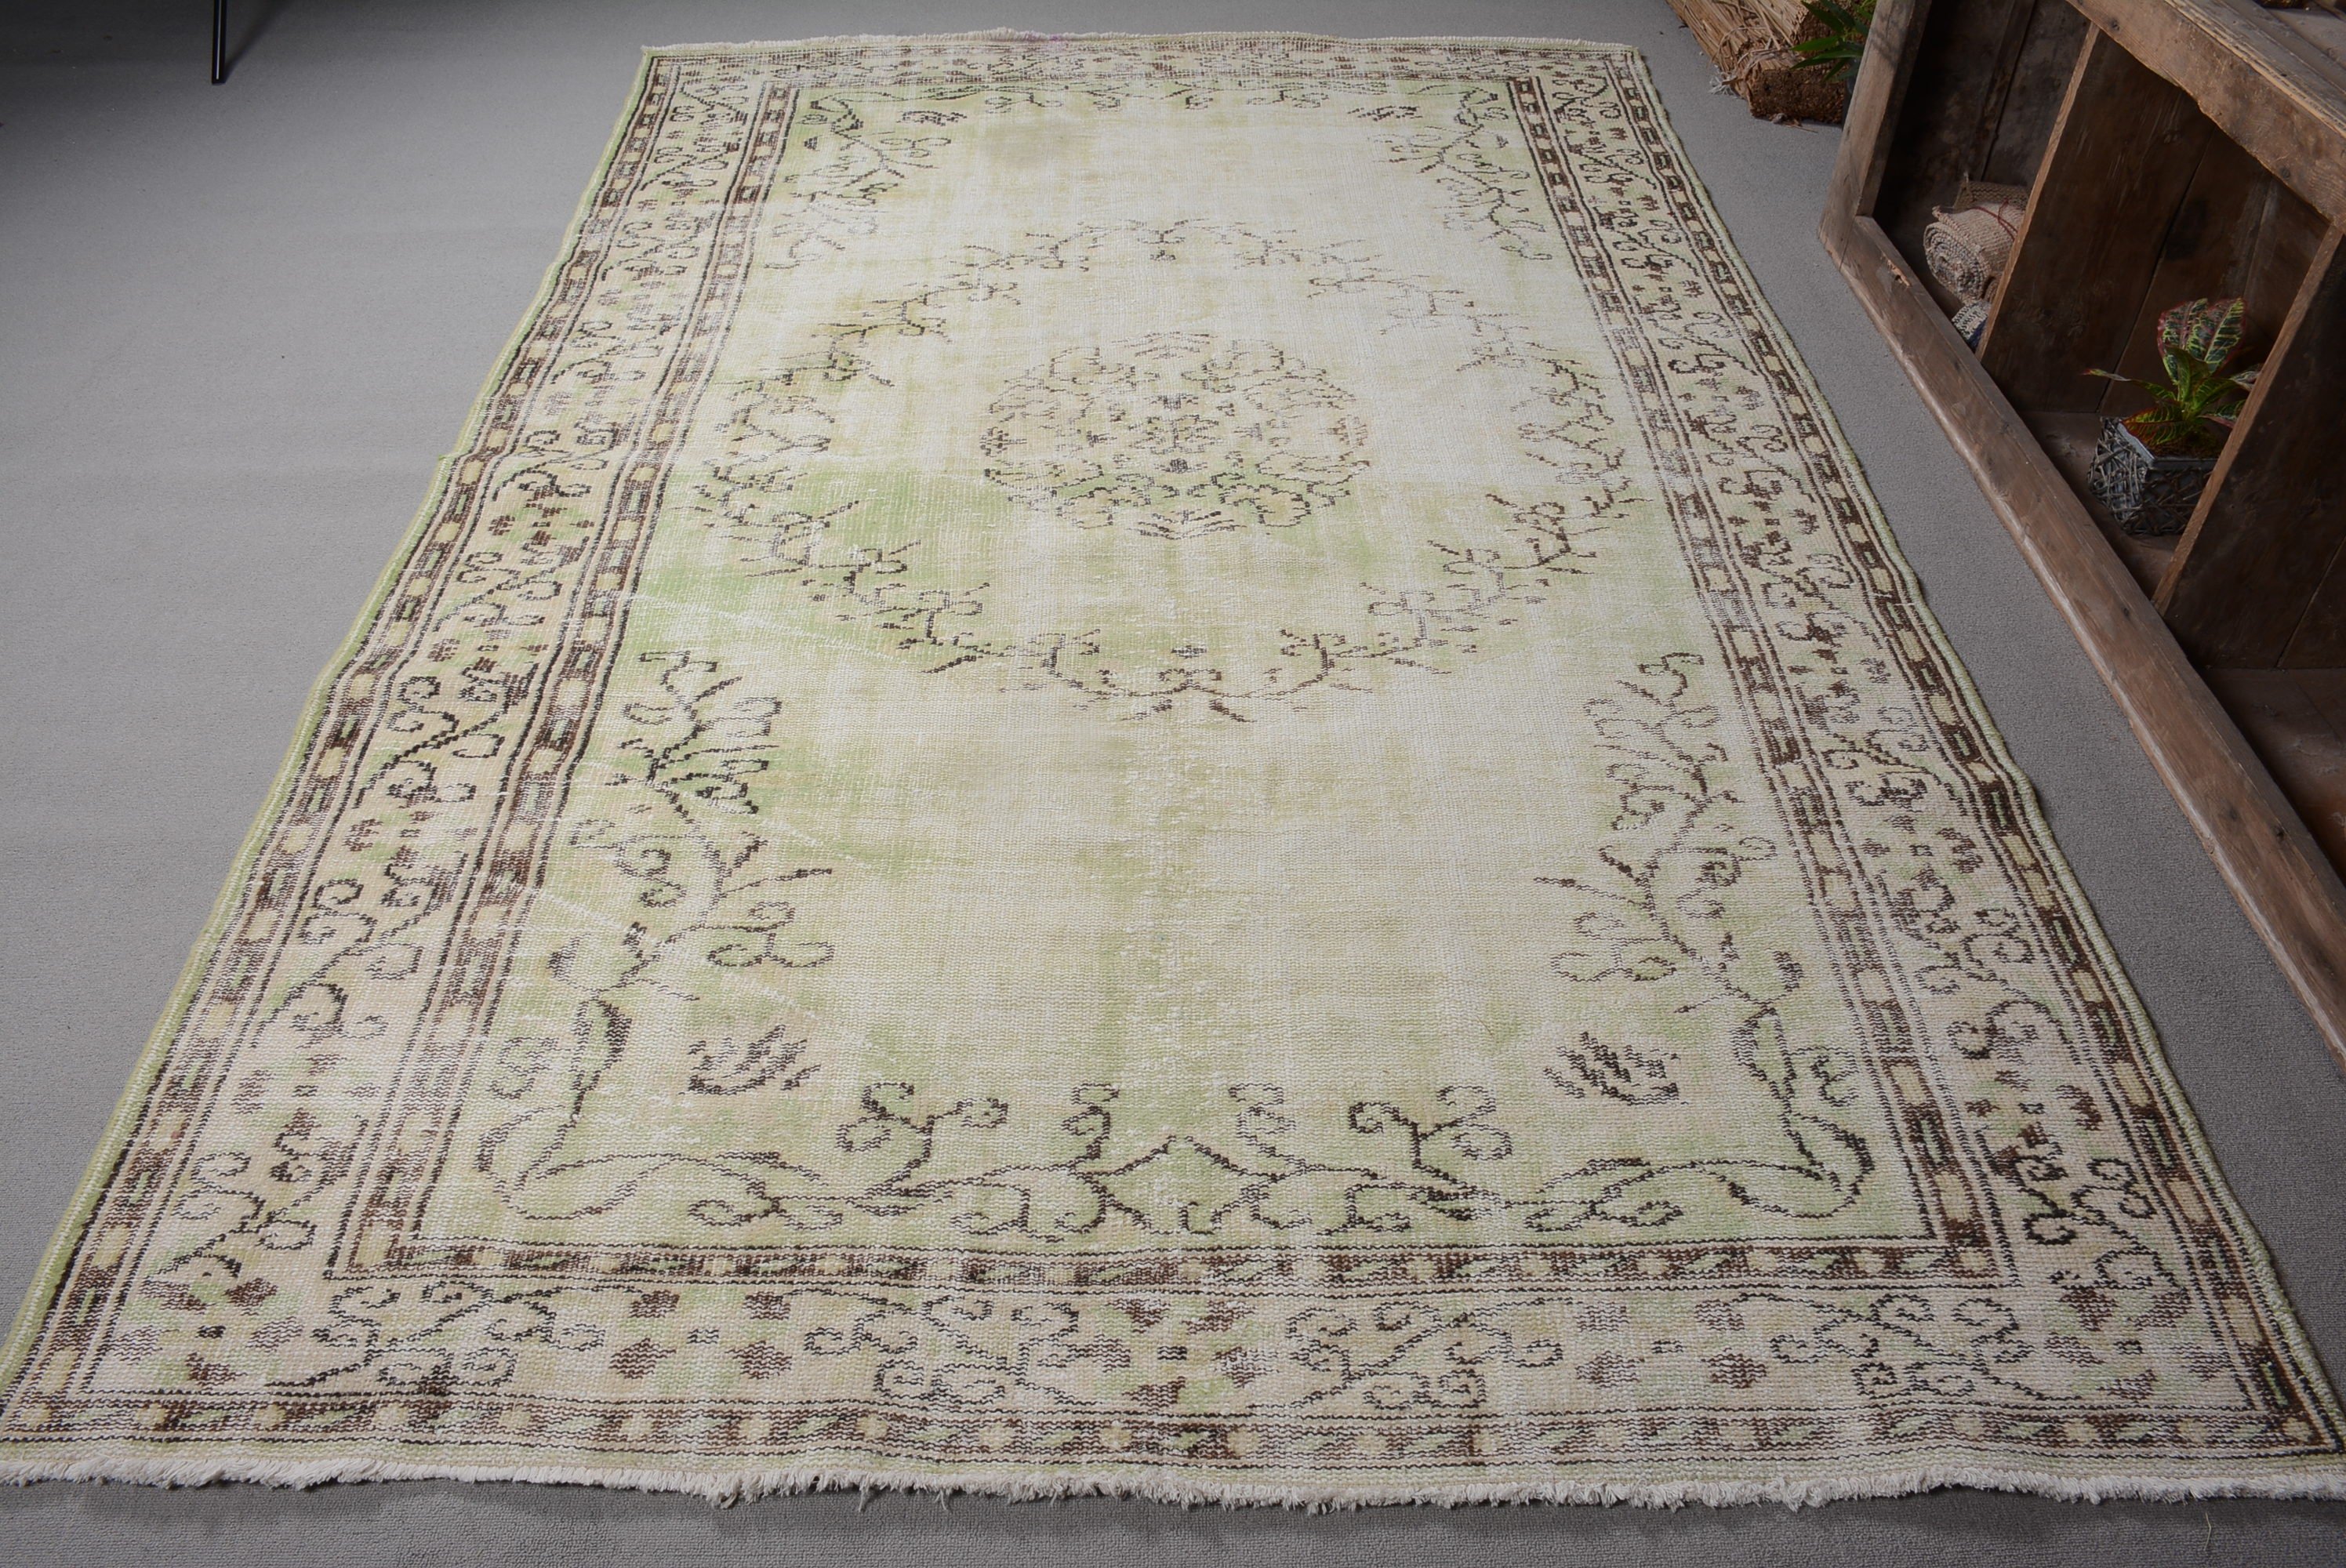 Turkish Rugs, Dining Room Rugs, 5.8x9.3 ft Large Rug, Bedroom Rug, Green Kitchen Rug, Kitchen Rug, Wool Rug, Rugs for Salon, Vintage Rugs